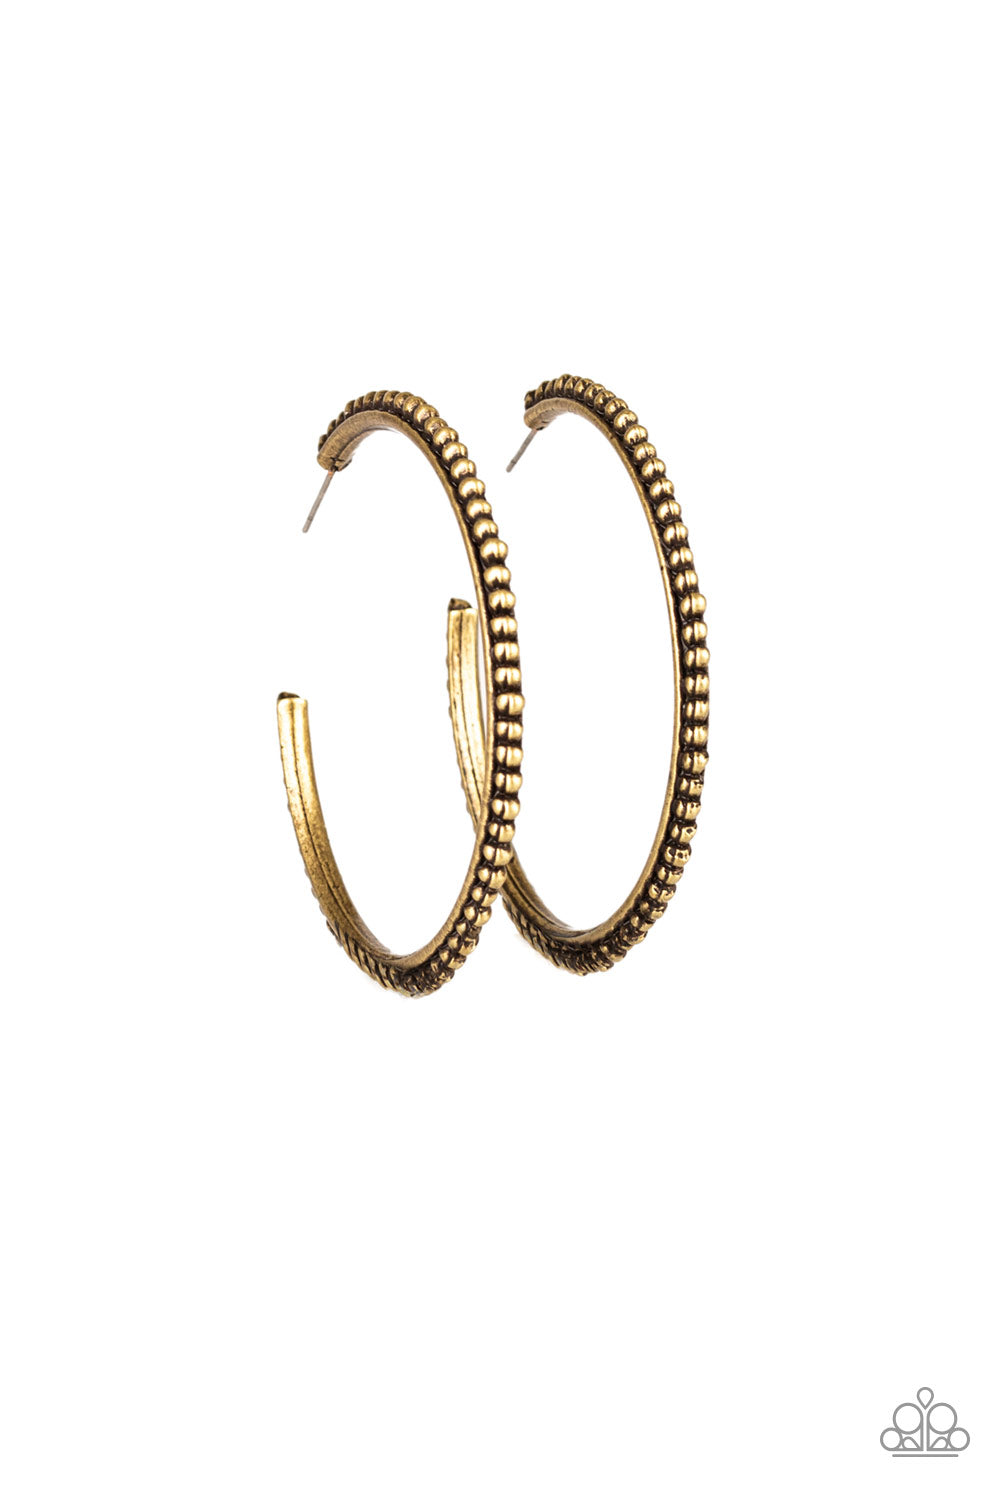 five-dollar-jewelry-totally-on-trend-brass-earrings-paparazzi-accessories